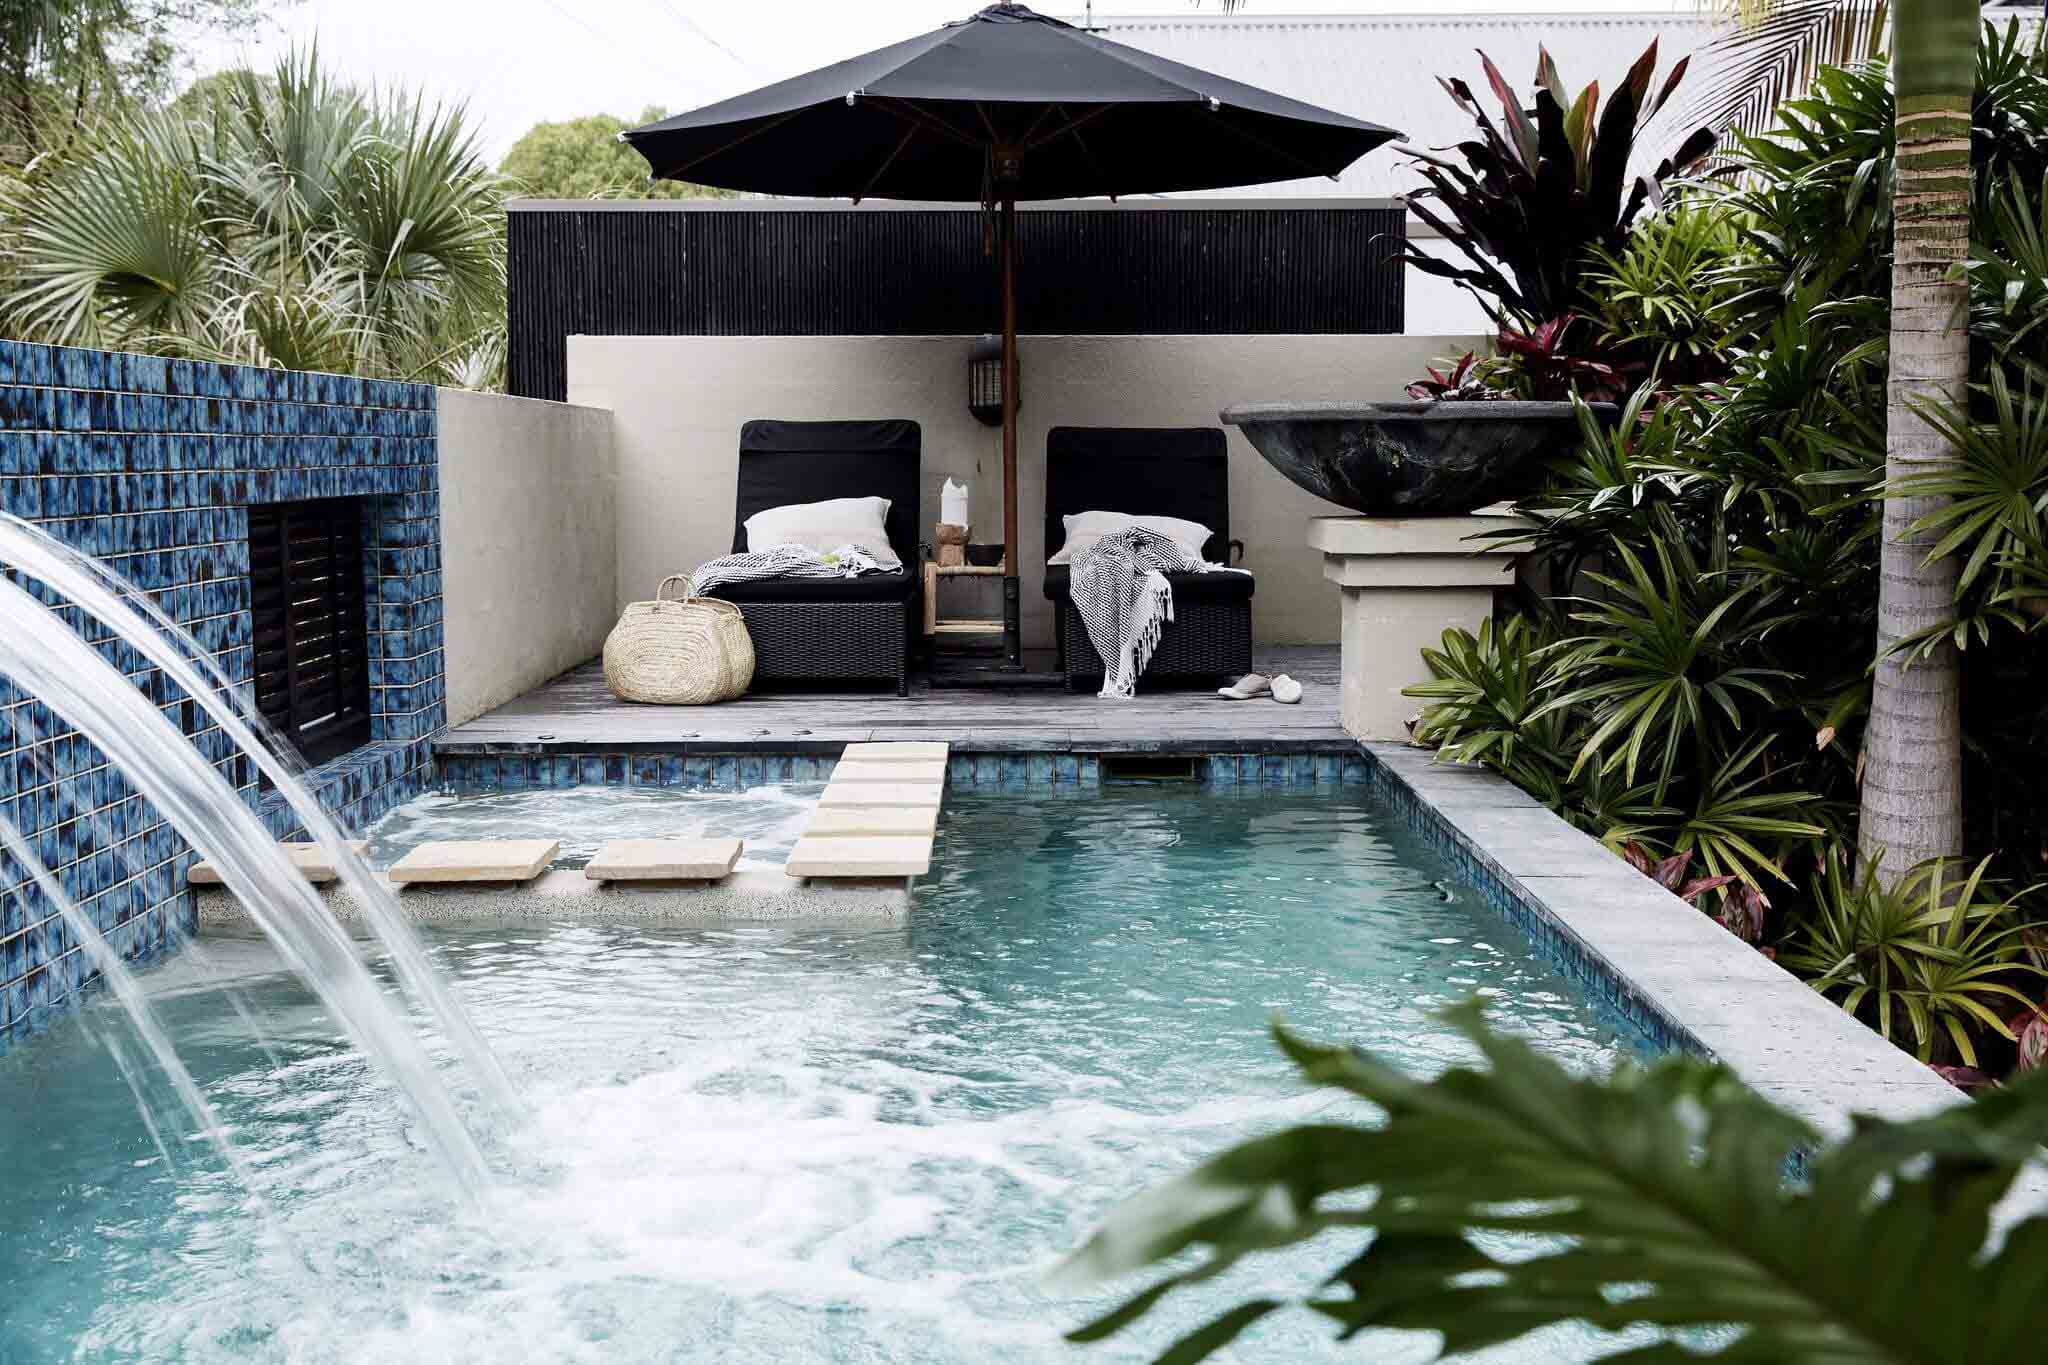 Black umbrella and daybeds next to the private pool, waterfall and heated spa at The Villas of Byron